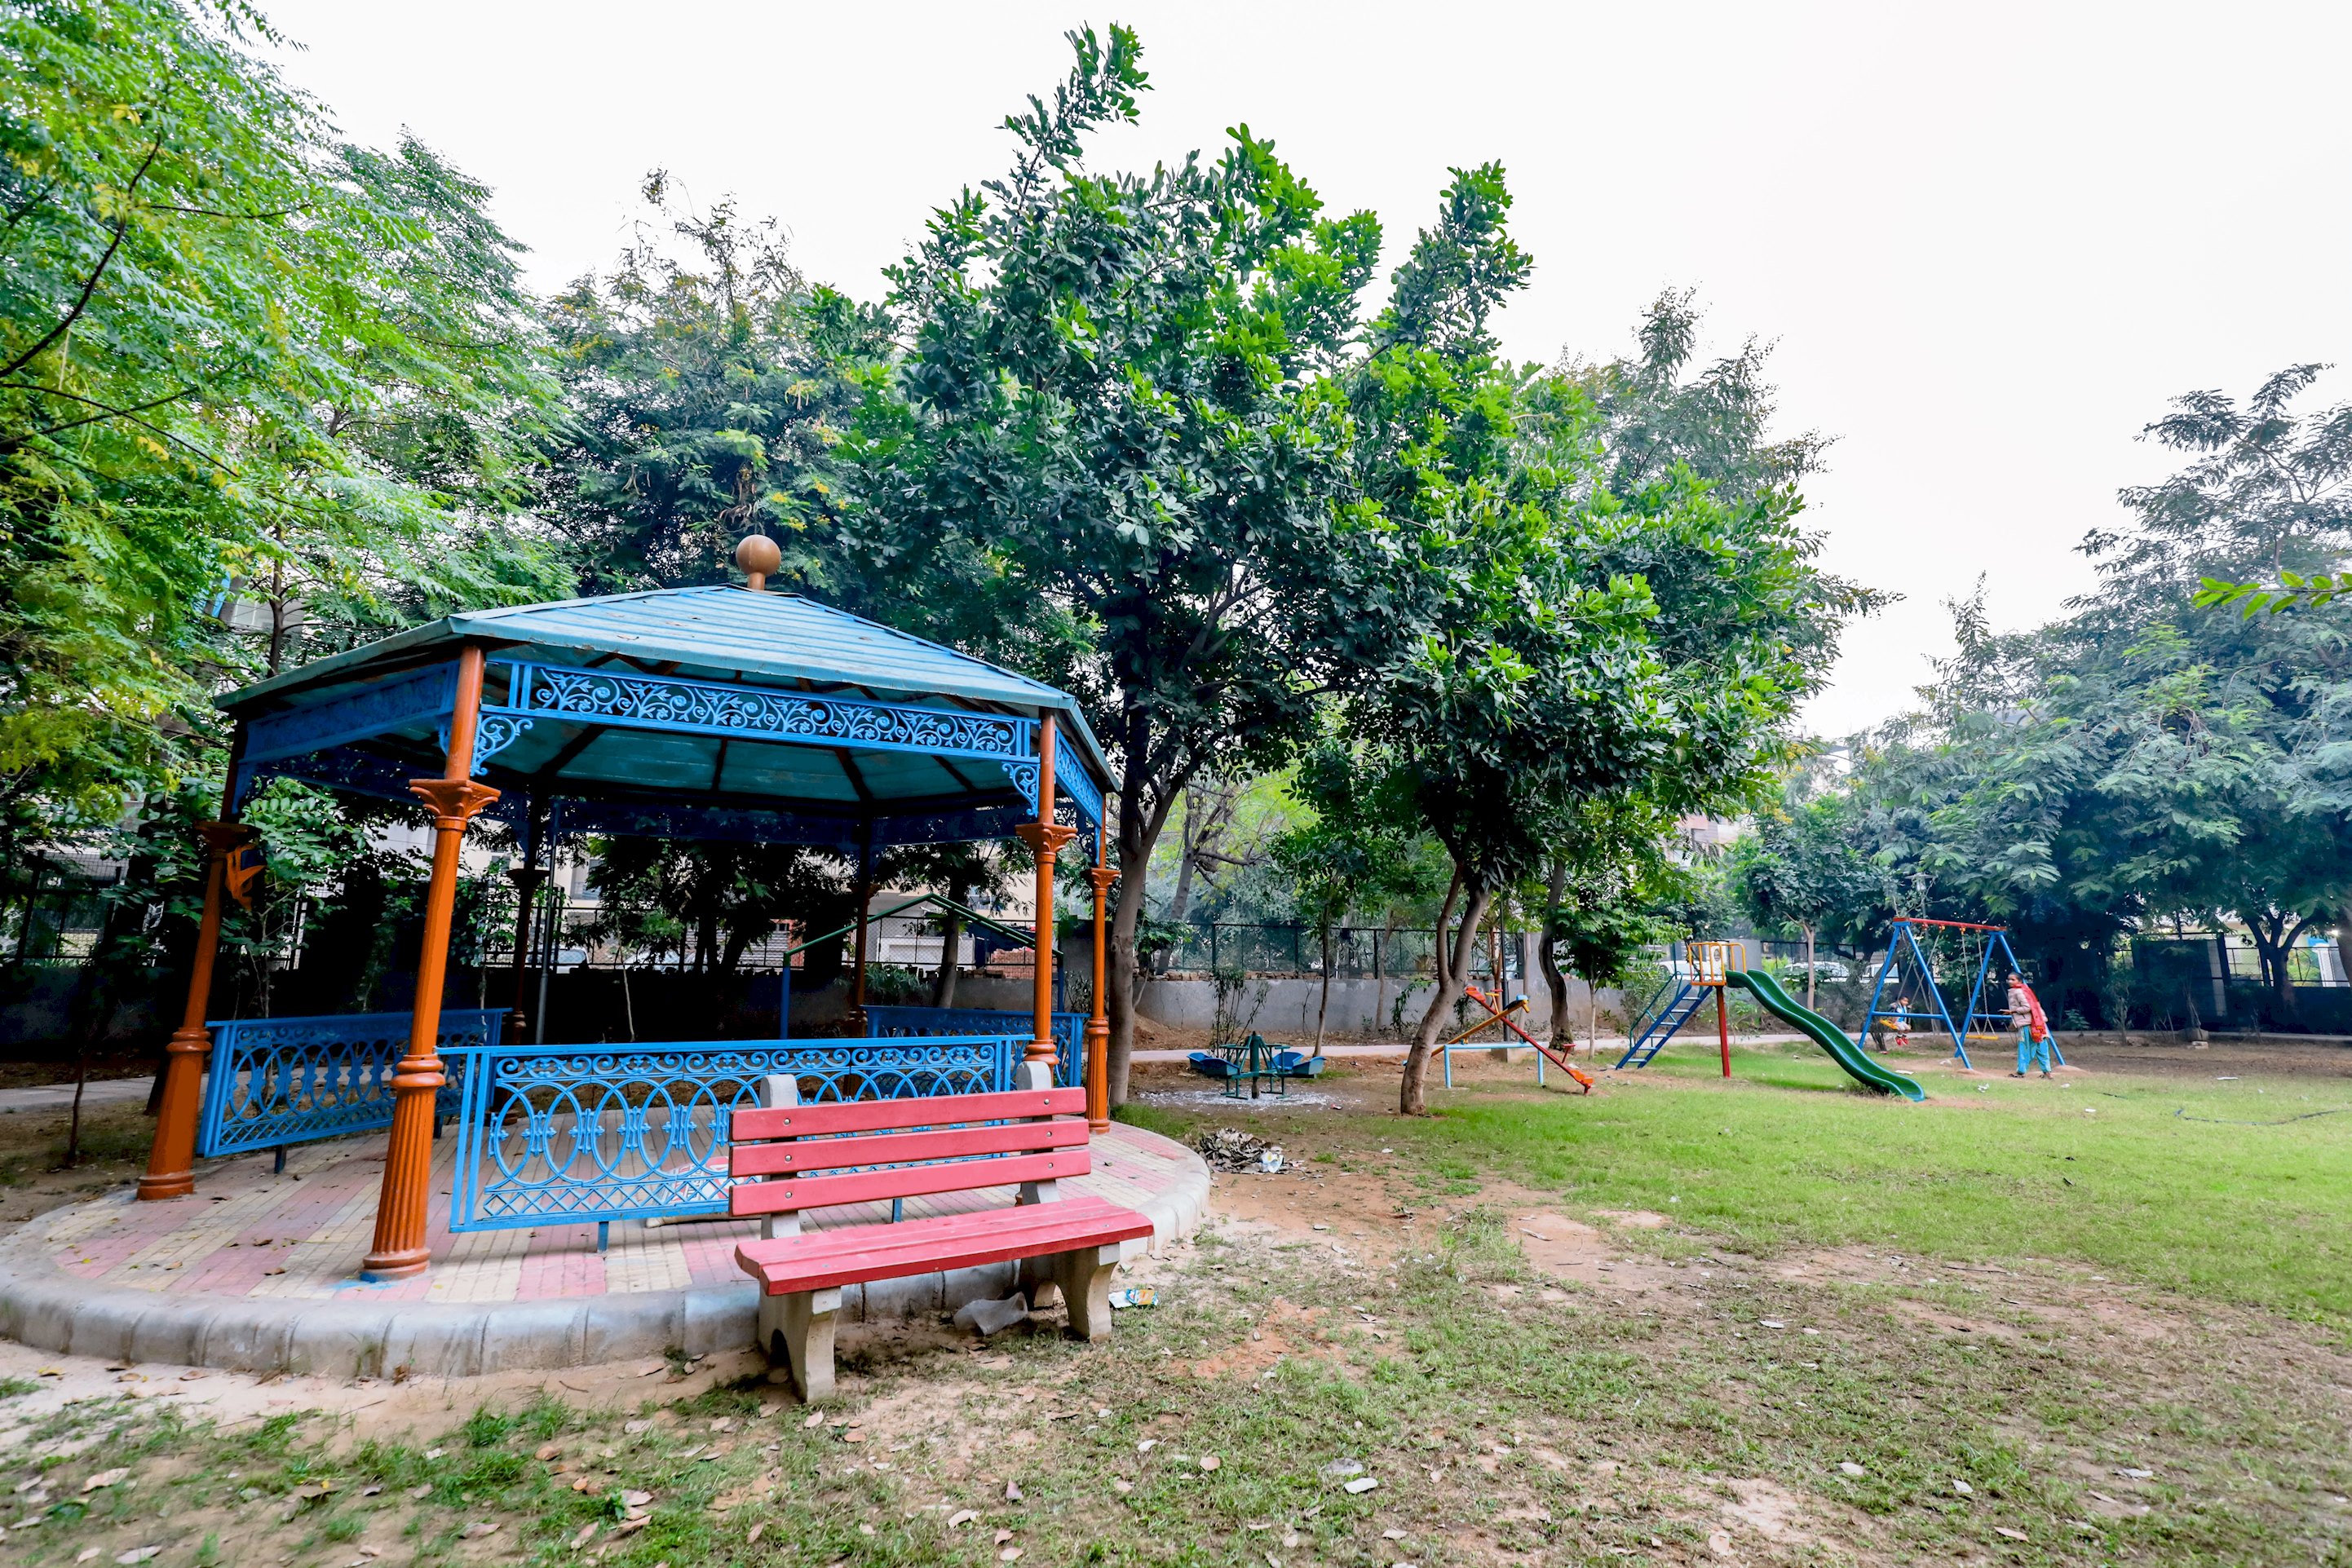 Lively Park Ambience: Children Delight in Rides and Games, Surrounded by Vibrant Play Equipment, While Echoes of Joyful Laughter Fill the Air.
